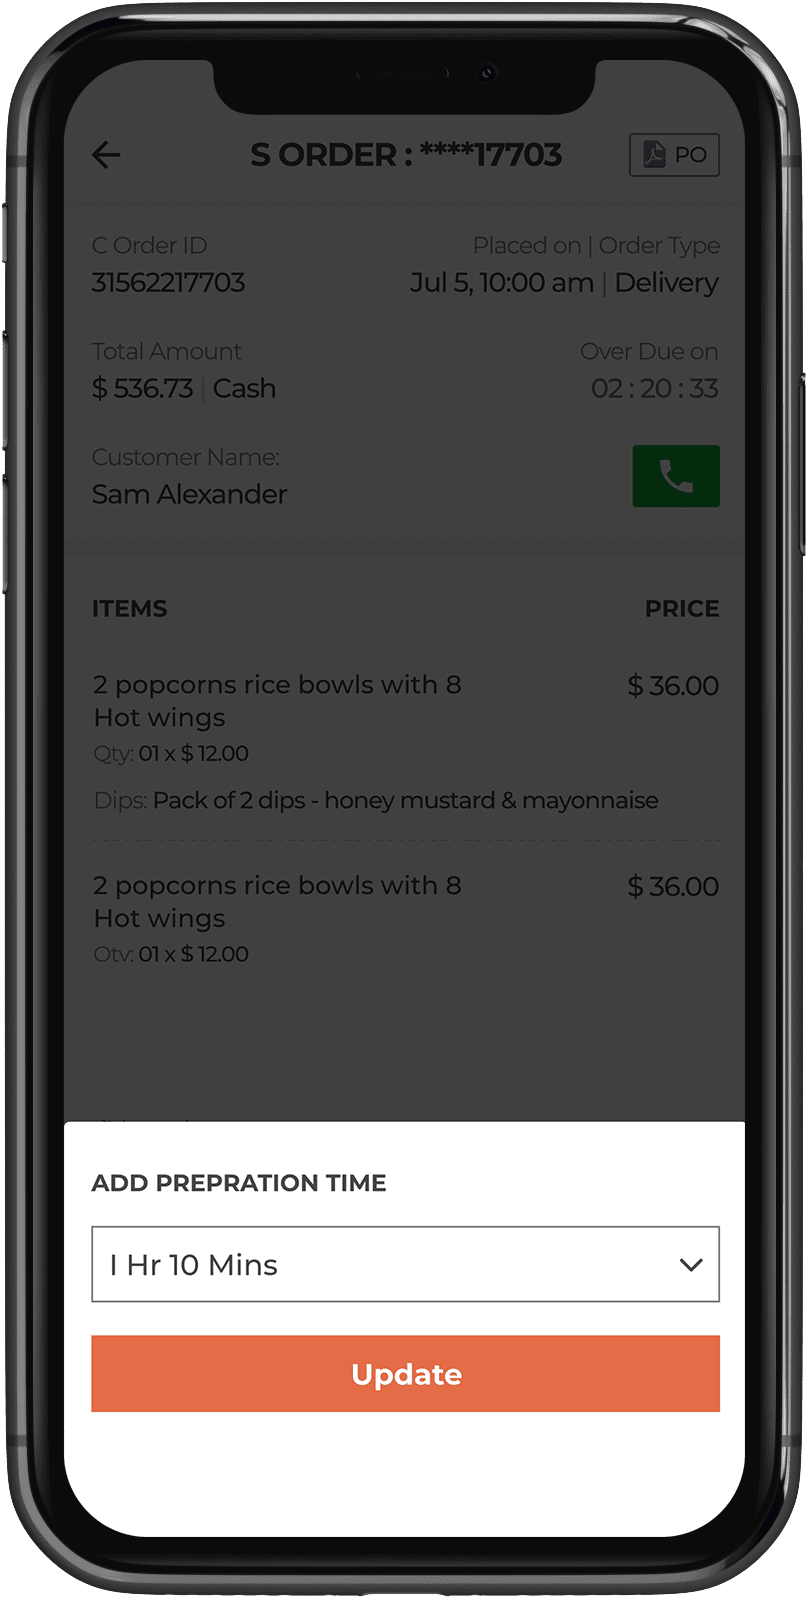 add-preparation-time-in-food-delivery-picker-app.png